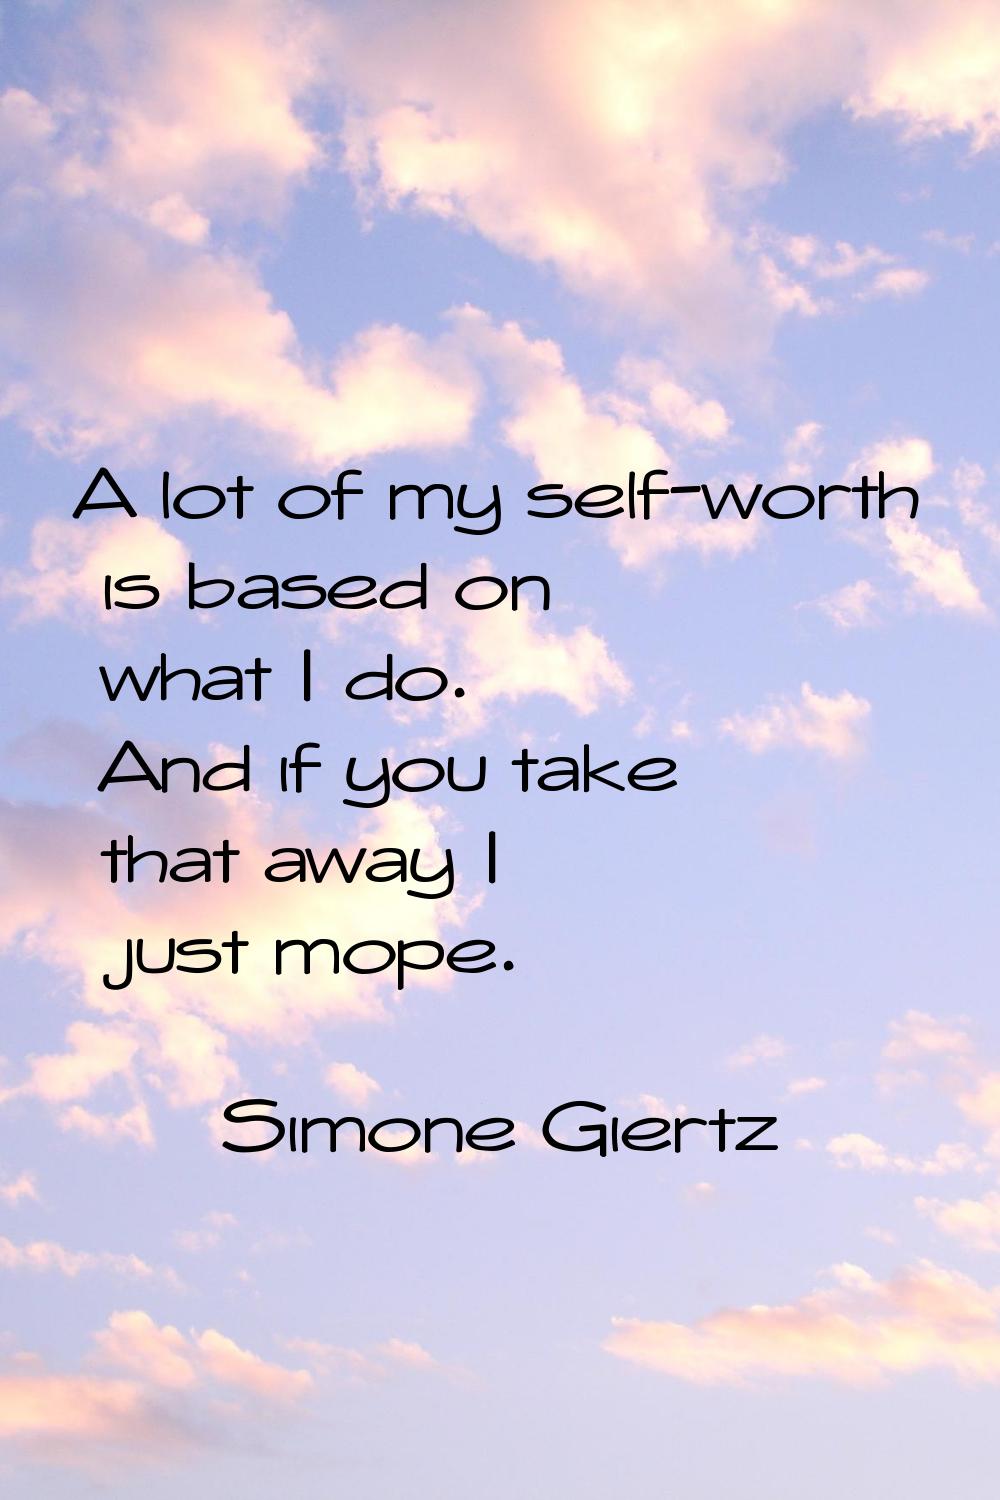 A lot of my self-worth is based on what I do. And if you take that away I just mope.